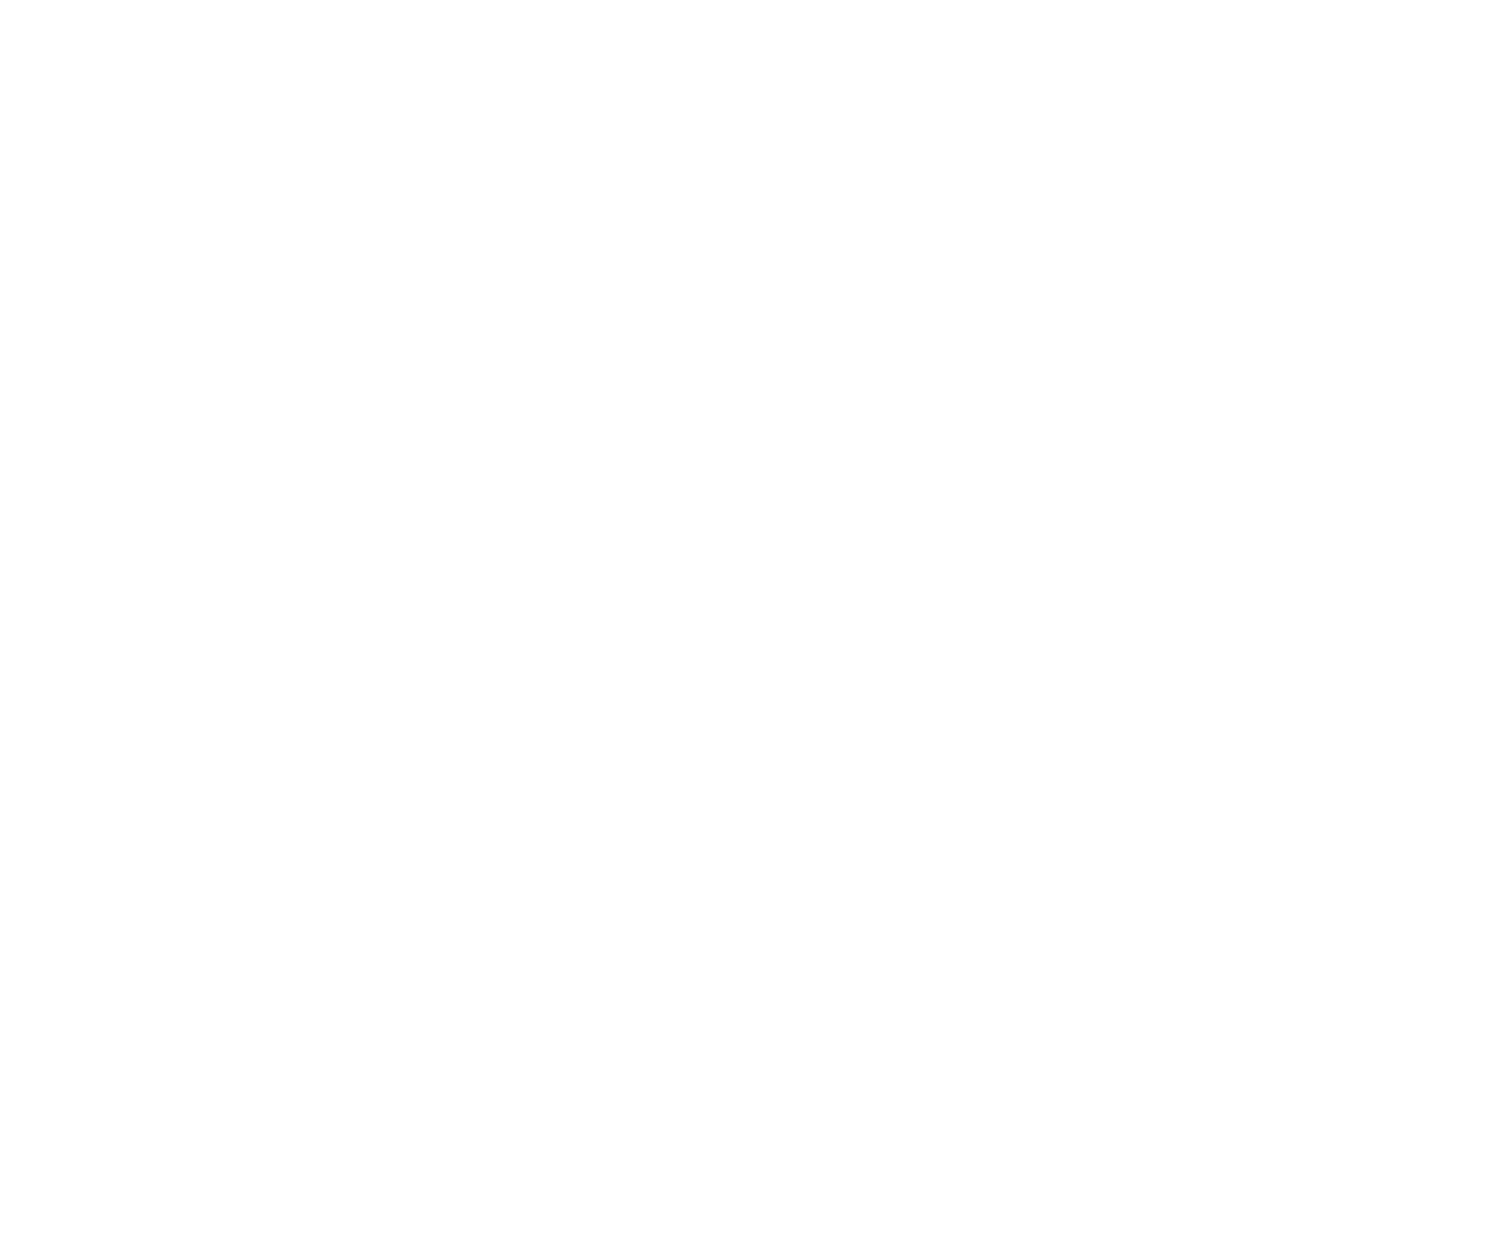 Foothills Consignment House